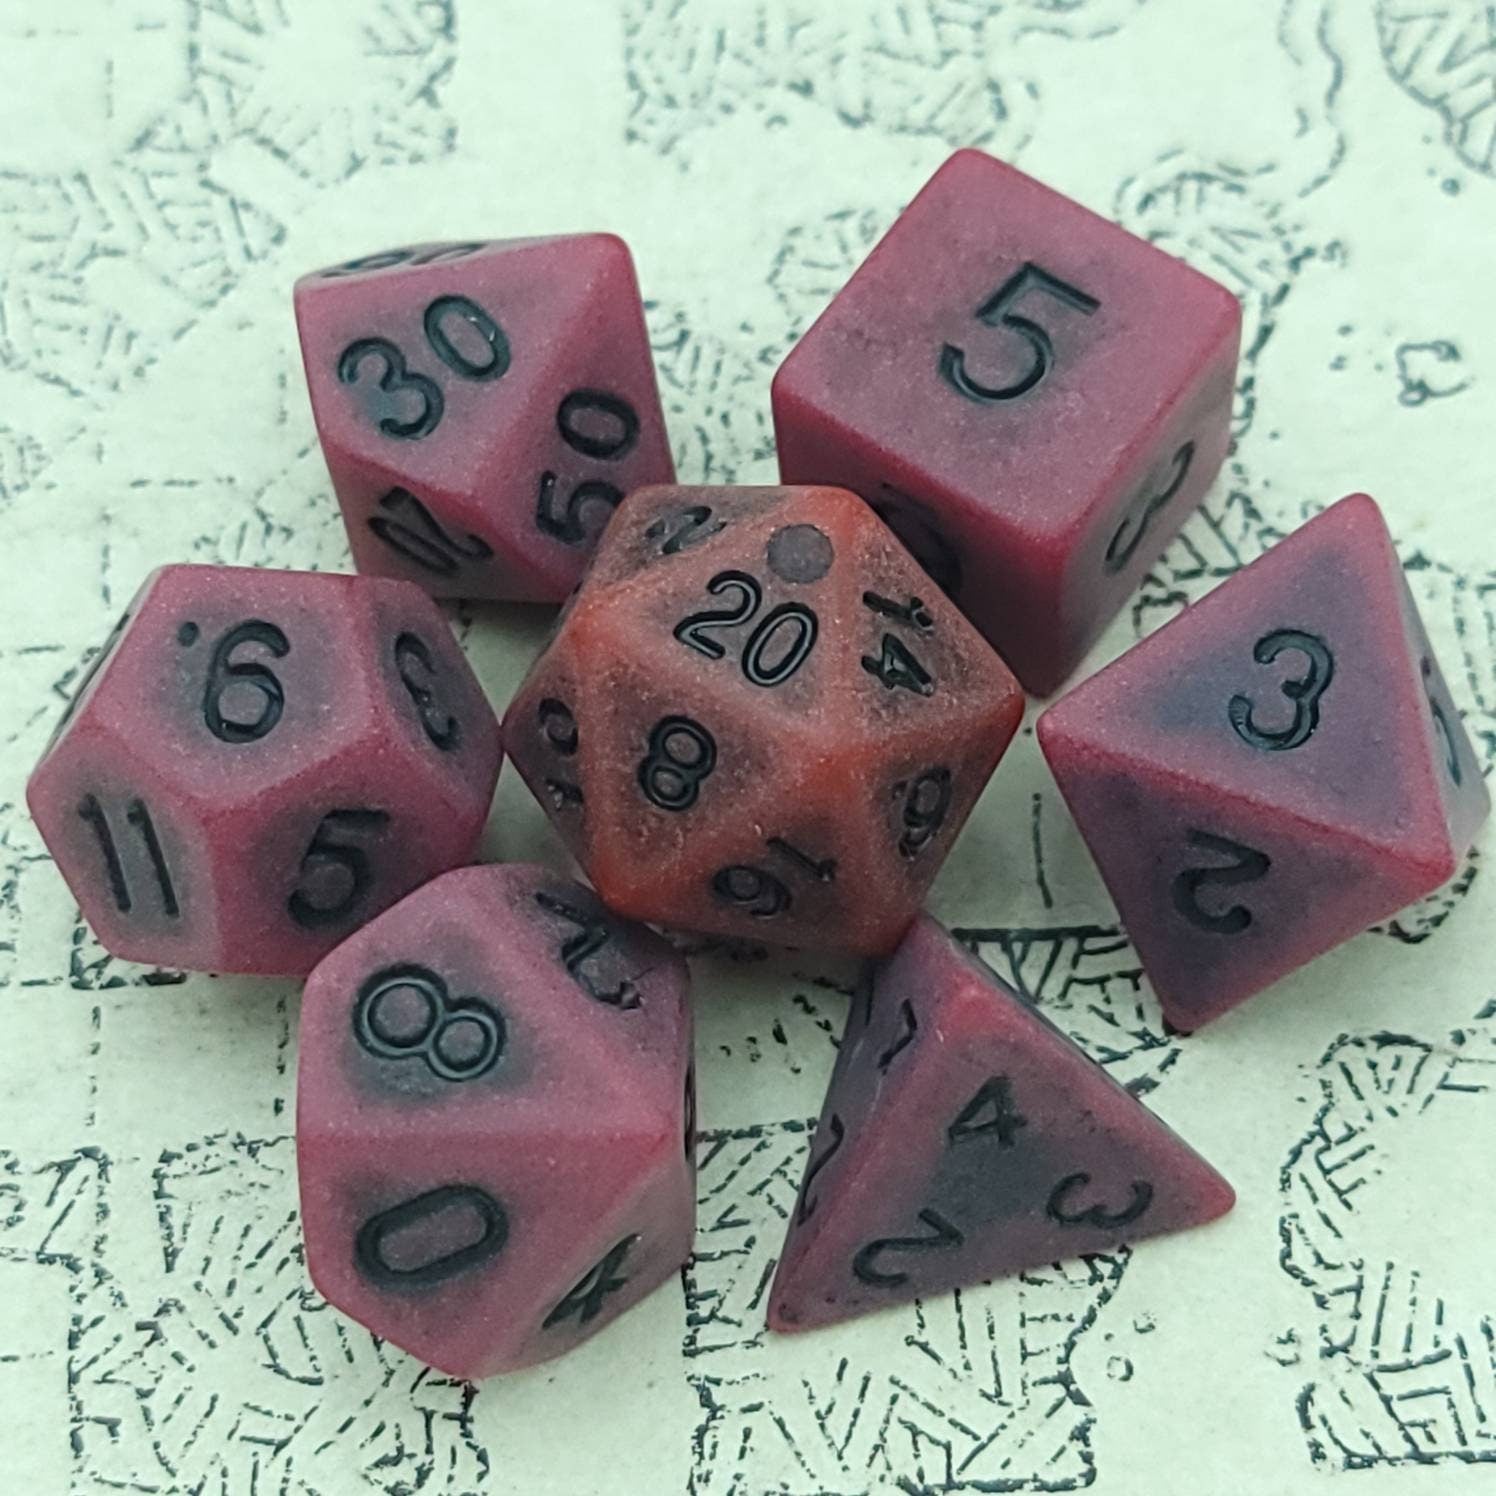 Ancient Blood | RPG Dice Set| RPG Dice | Polyhedral Dice Set | Dungeons and Dragons | DnD Dice Set | Gaming Dice Set